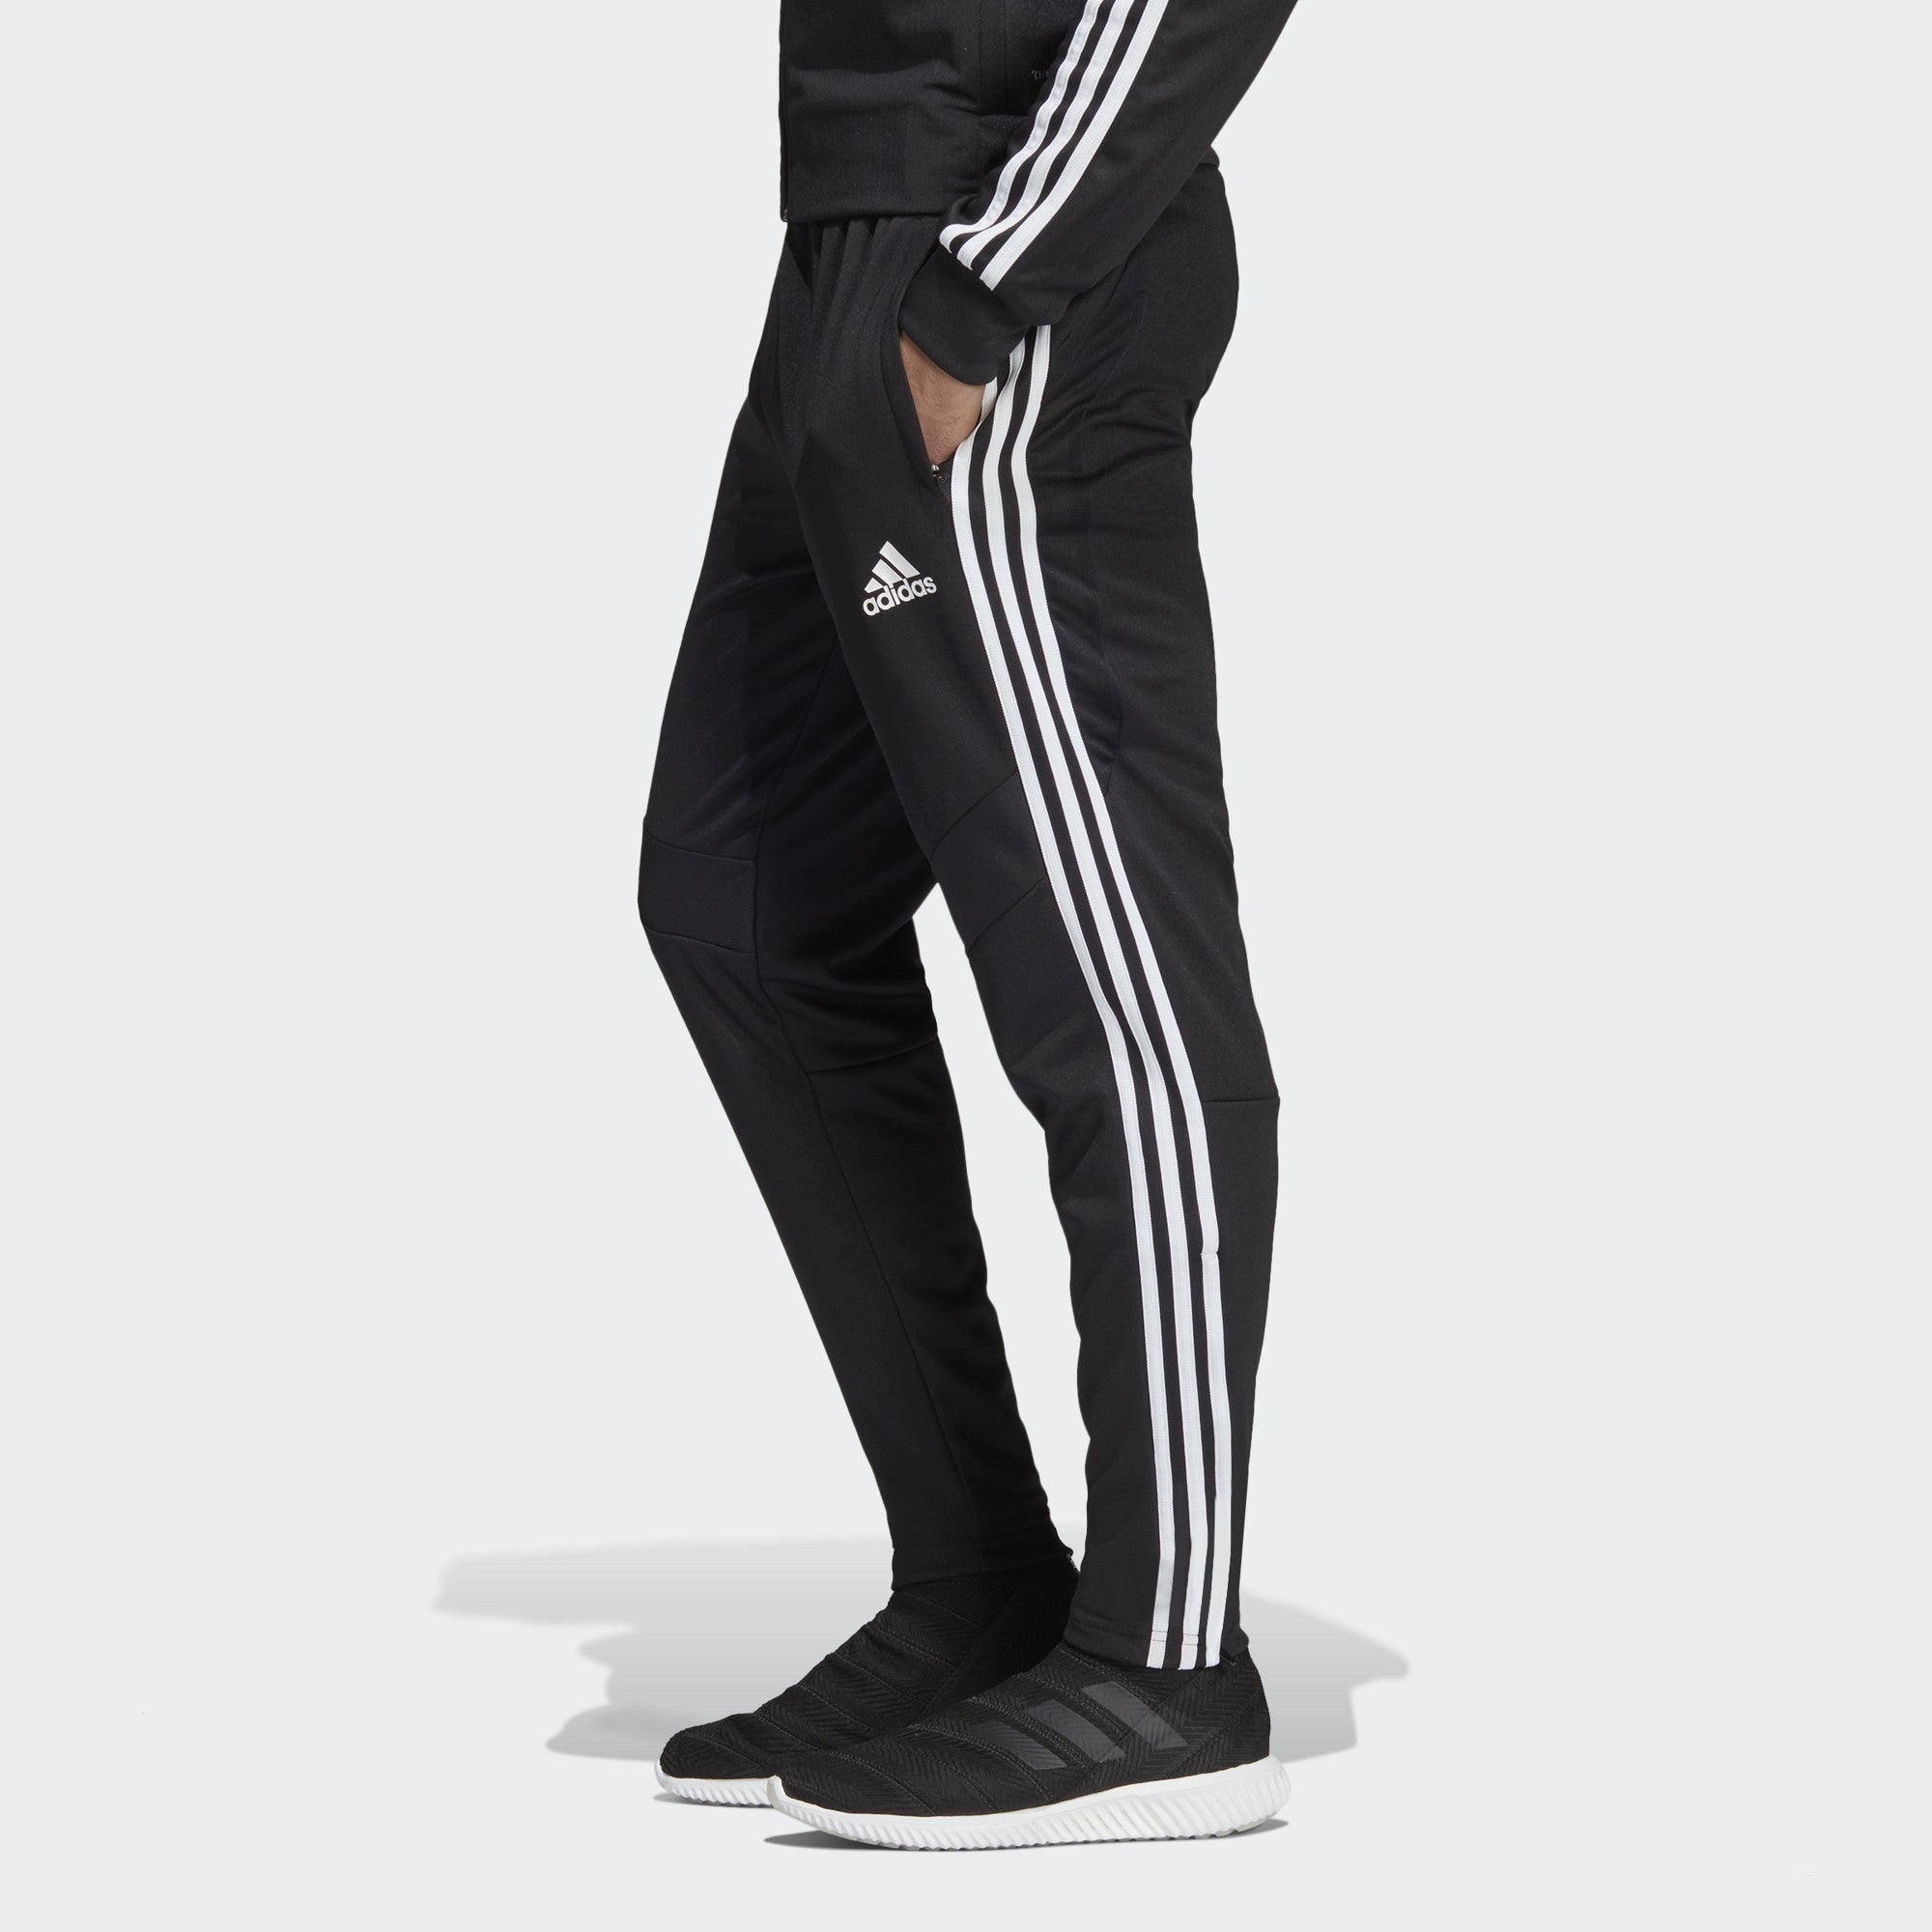 adidas Golf Trousers | Slim Fit Pant Styles